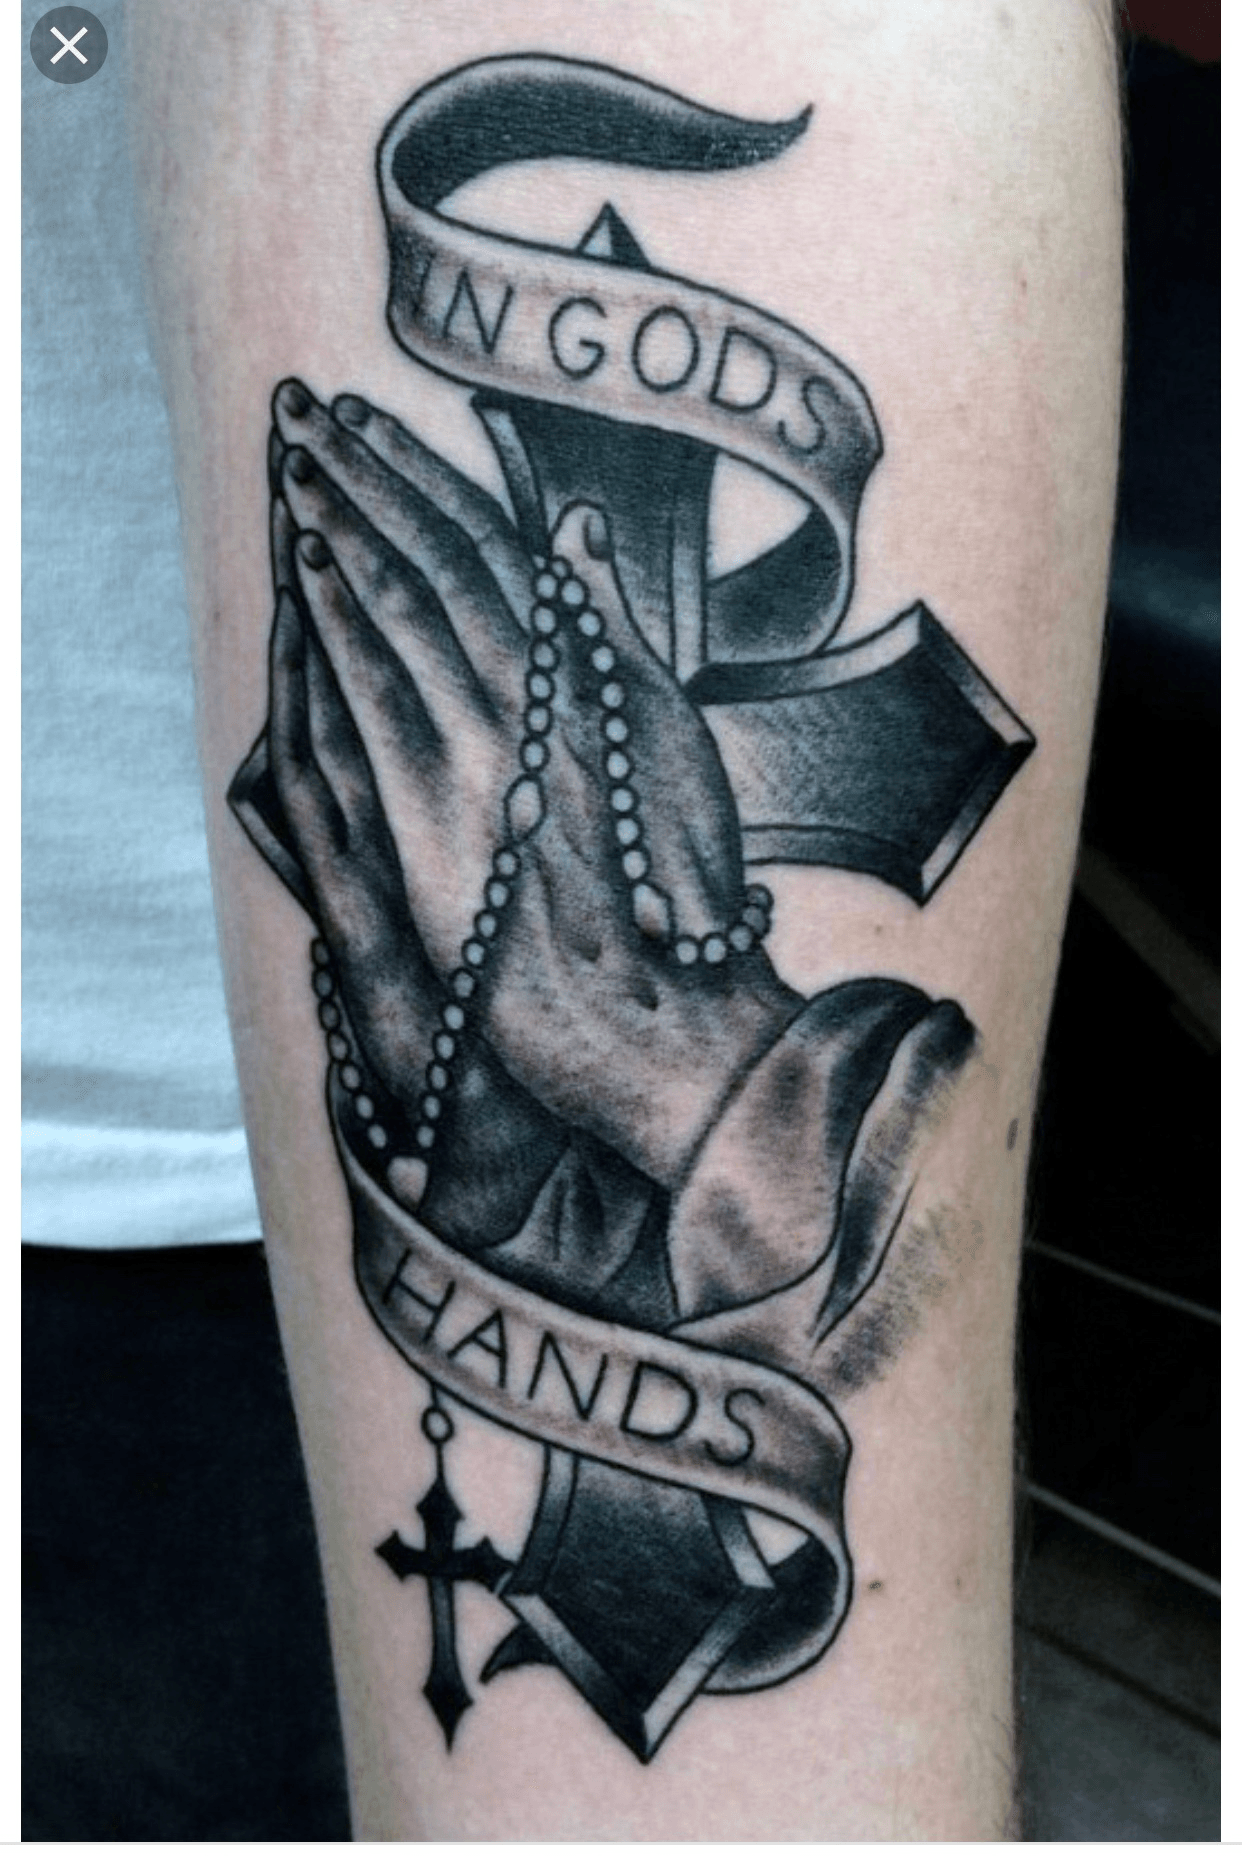 Tattoo uploaded by Ronaldo  In black and grey inc the only big thing I  really want to change is family isnt always blood instead of in Gods  hands  Tattoodo